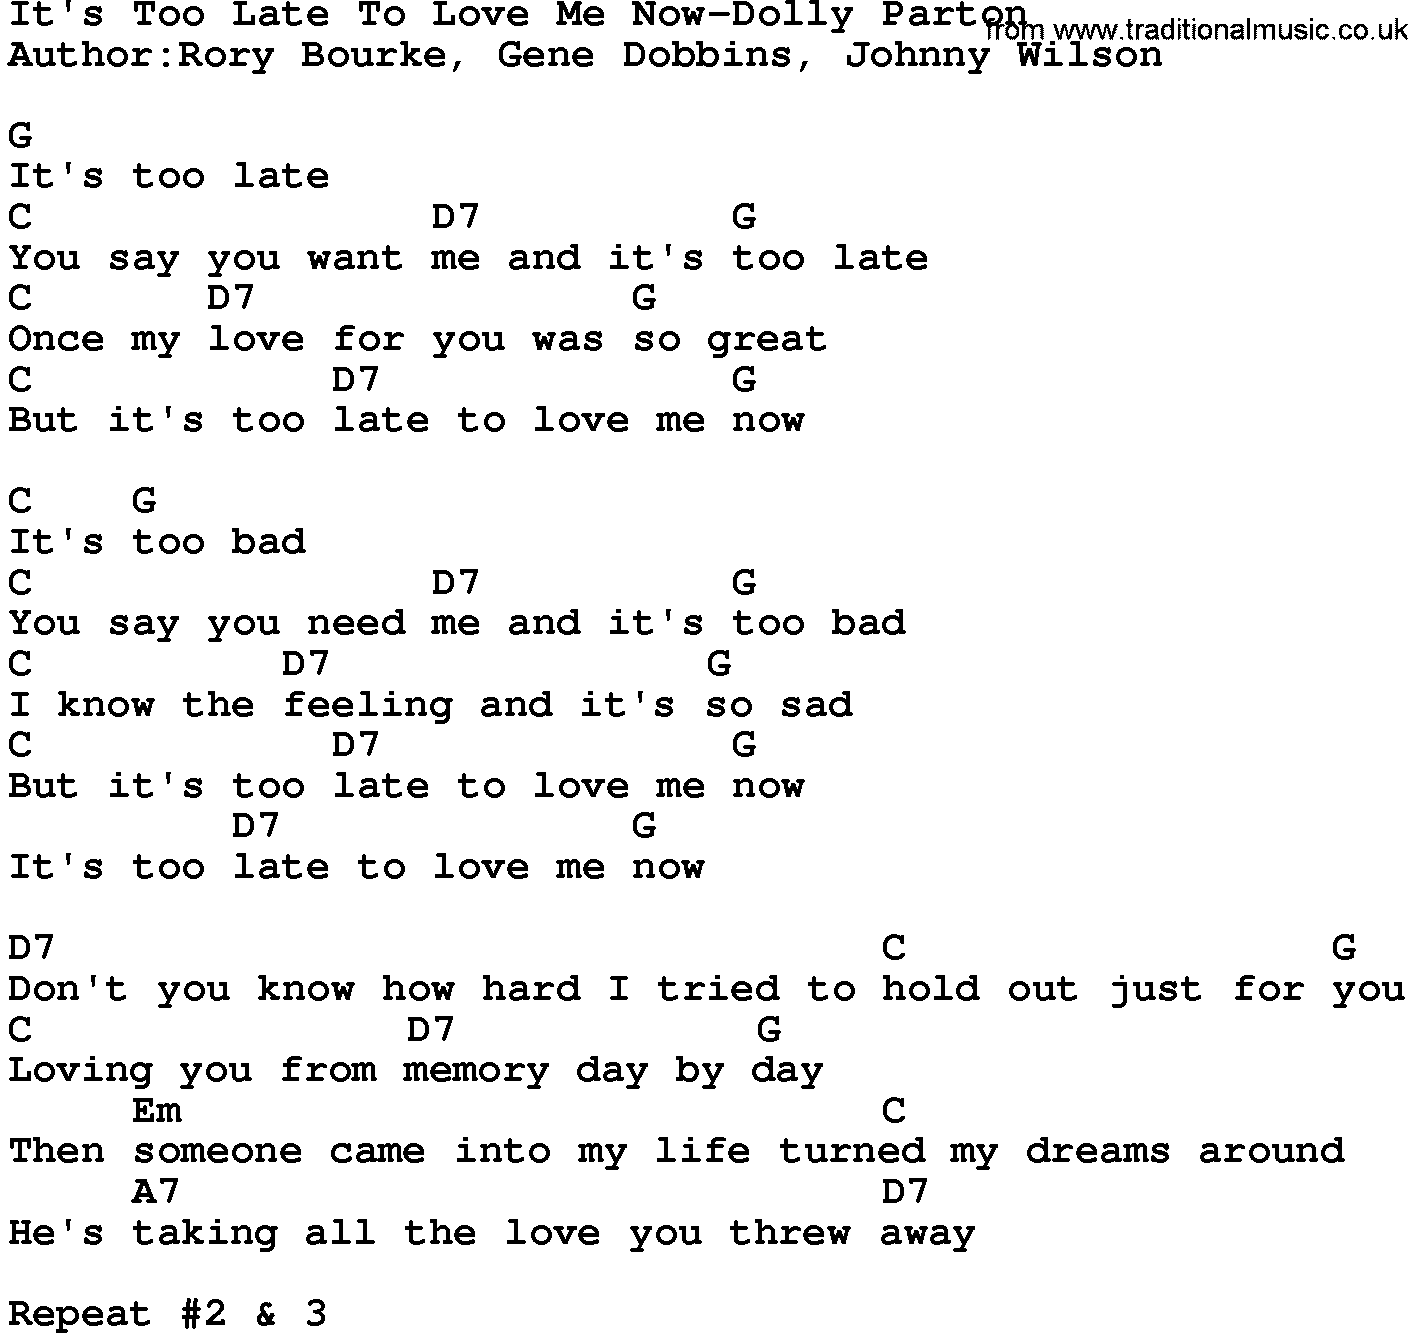 Country music song: It's Too Late To Love Me Now-Dolly Parton lyrics and chords